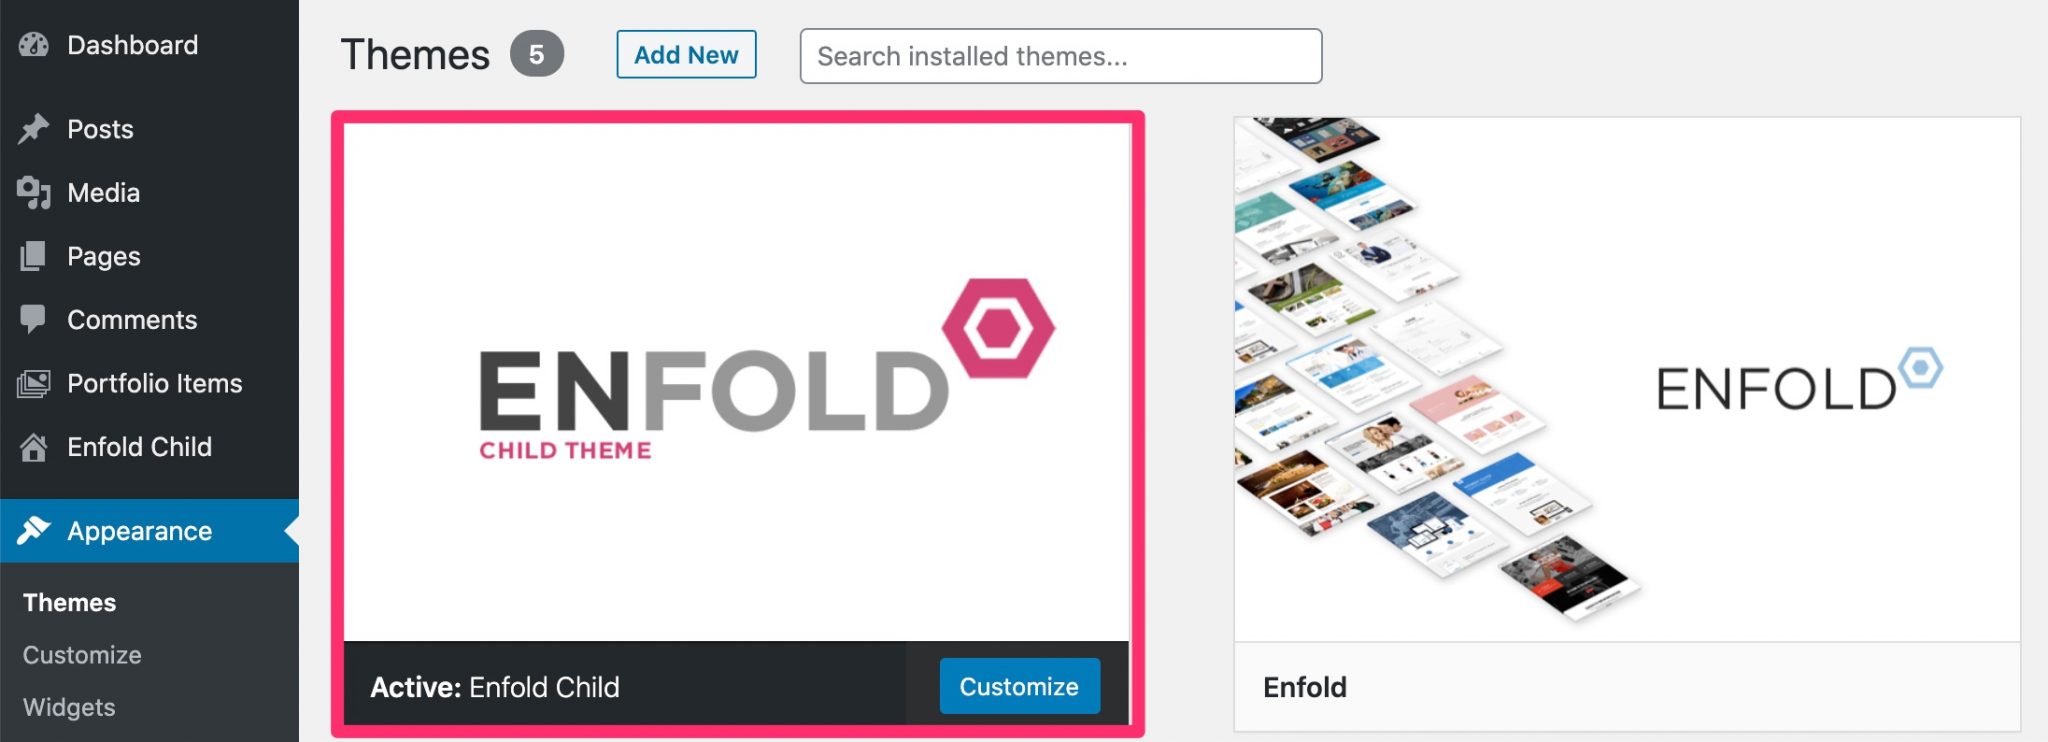 HOW TO INSTALL ENFOLD THEME?. Enfold is one of the most loved